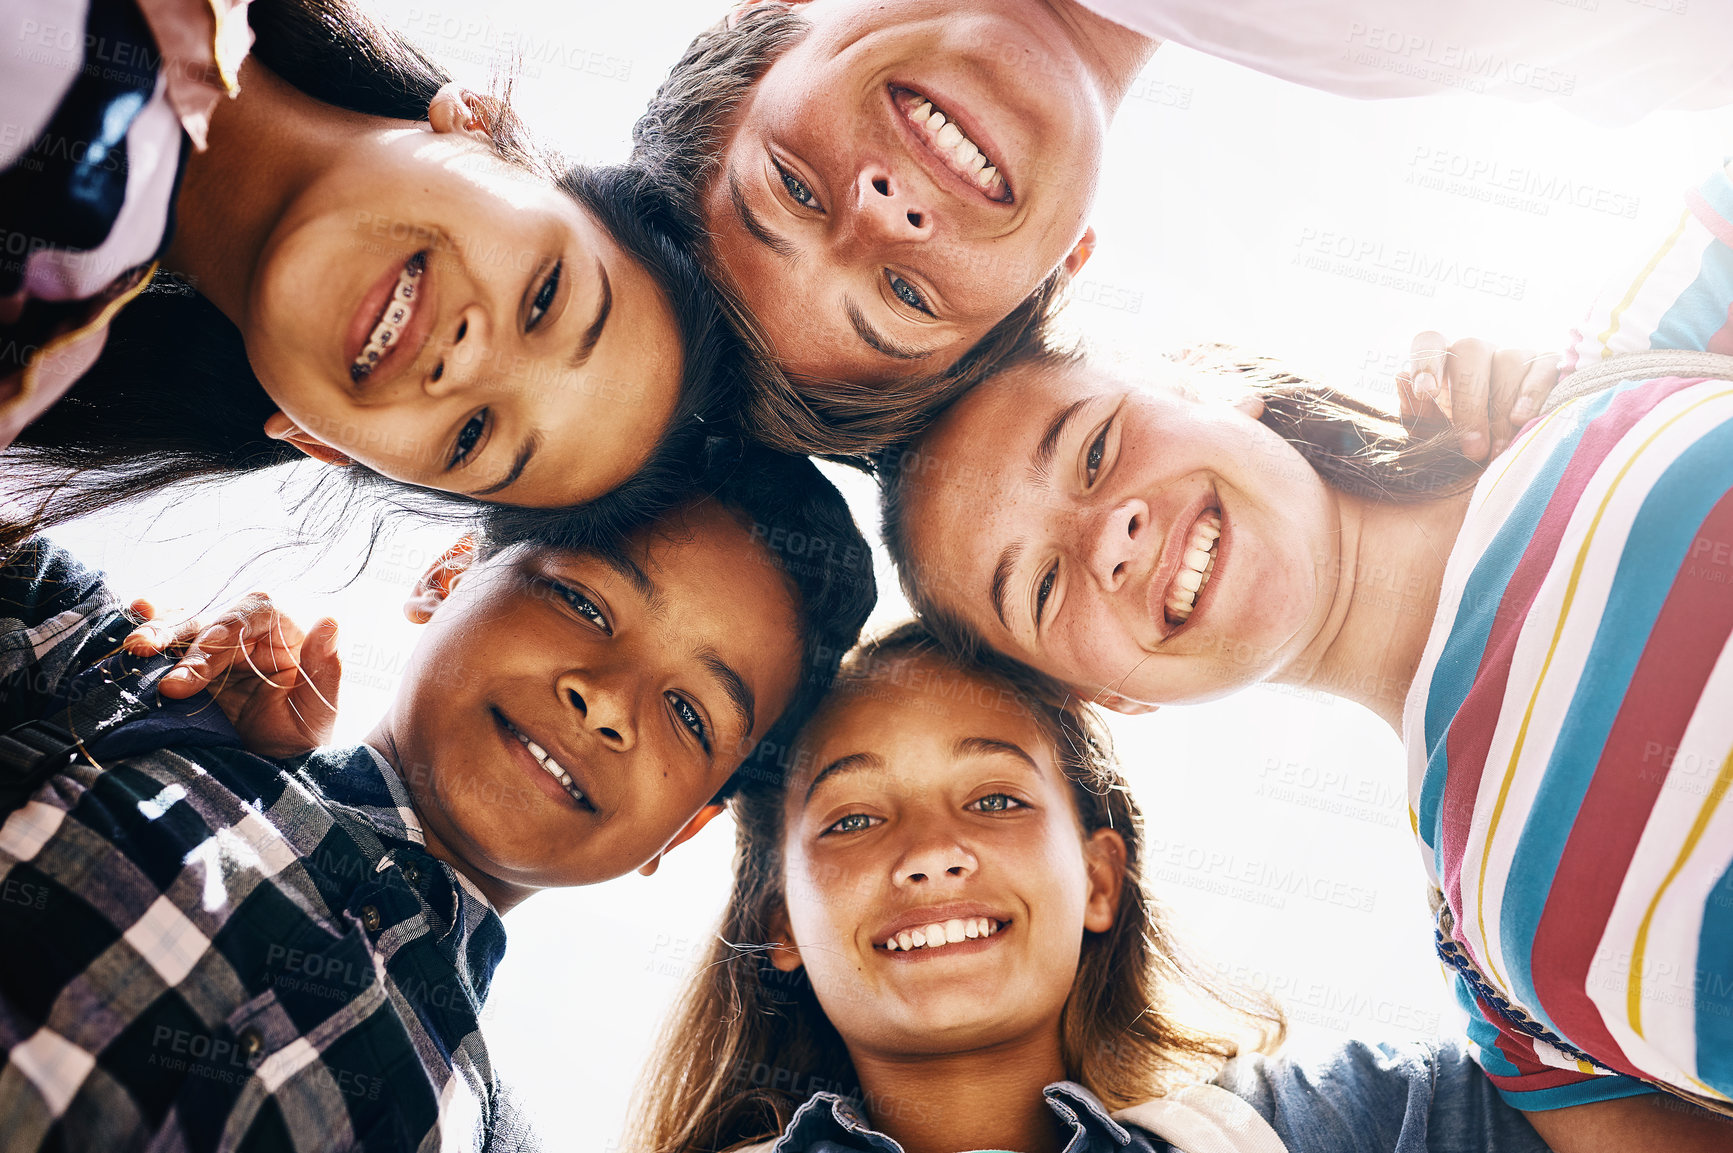 Buy stock photo Low angle portrait of a group of diverse schoolchildren standing in a huddle